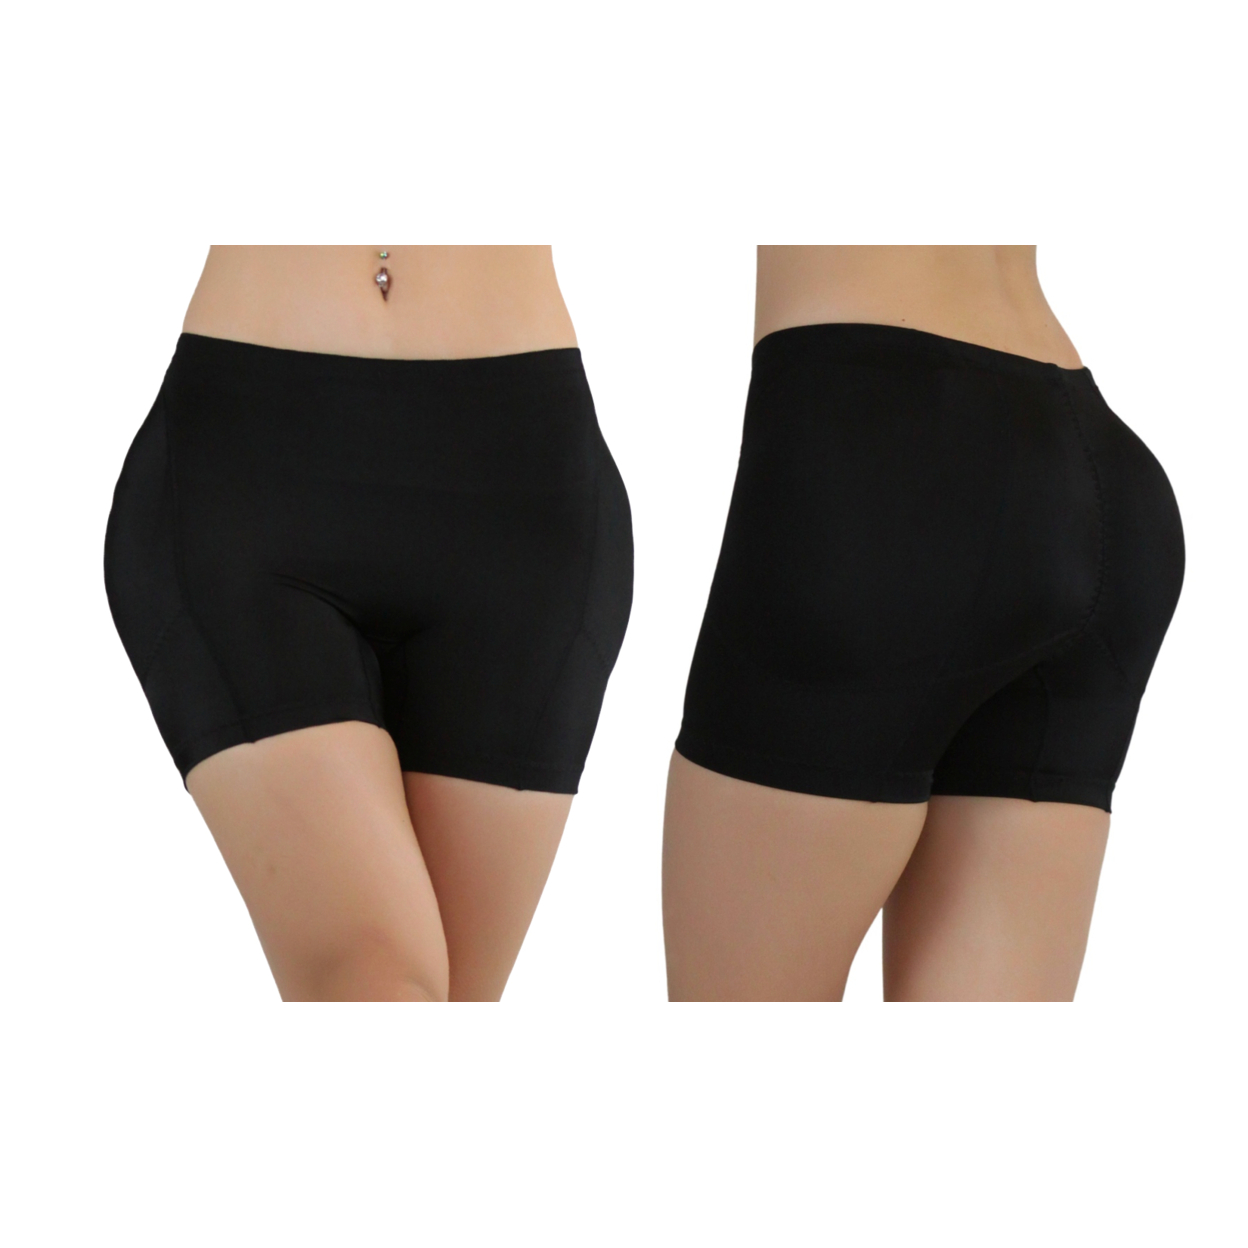 1 Or 2 Pack Of Women Butt And Hip Padded Shaper - Black, Small